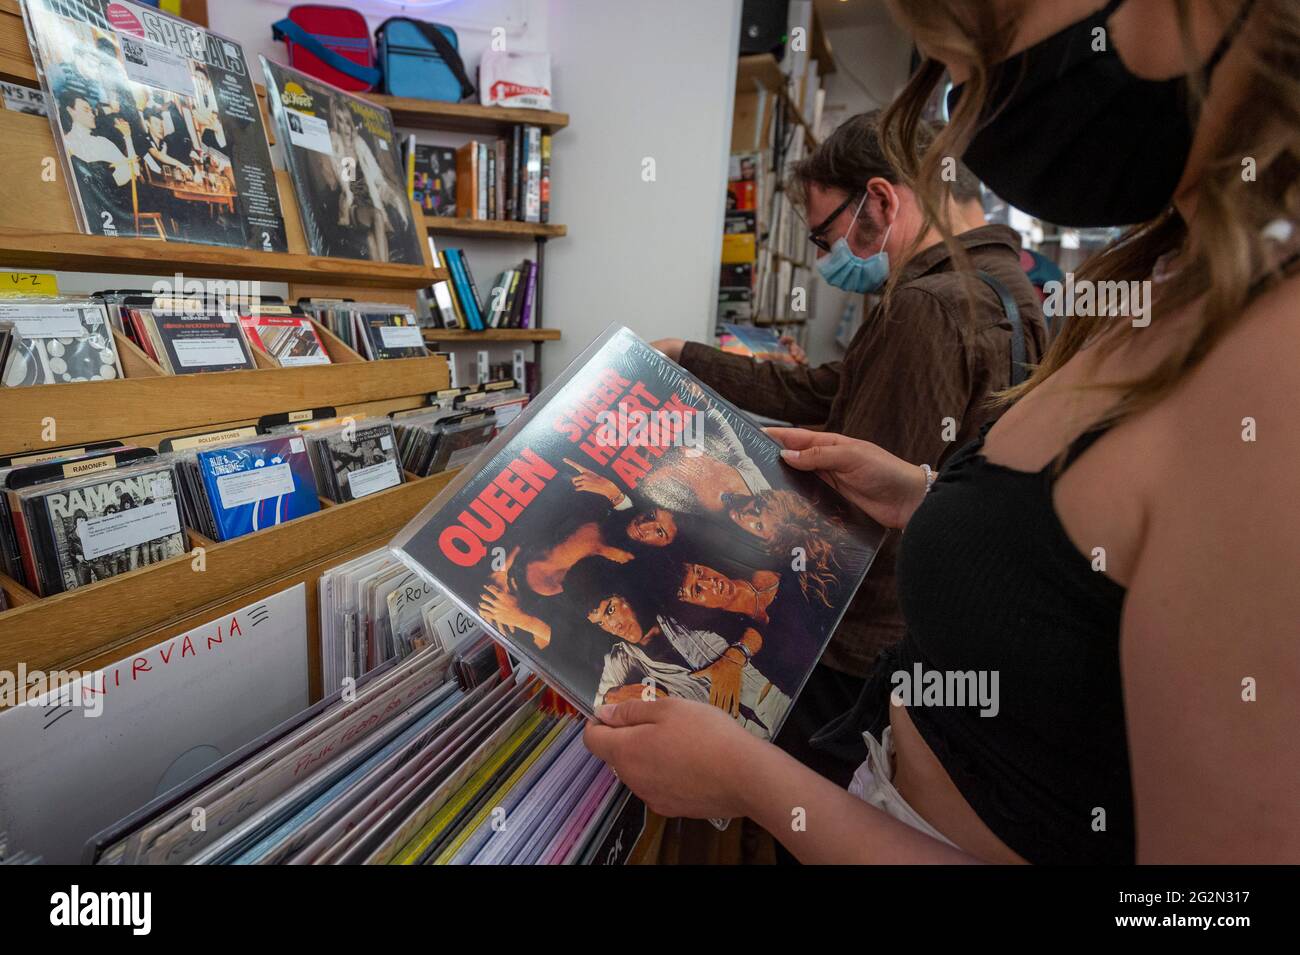 London Uk 12 June 21 Customers In Sounds Of The Universe Records In Soho On Record Store Day Where Independent Record Shops Worldwide Celebrate Music Including Special Vinyl Releases Made Exclusively For